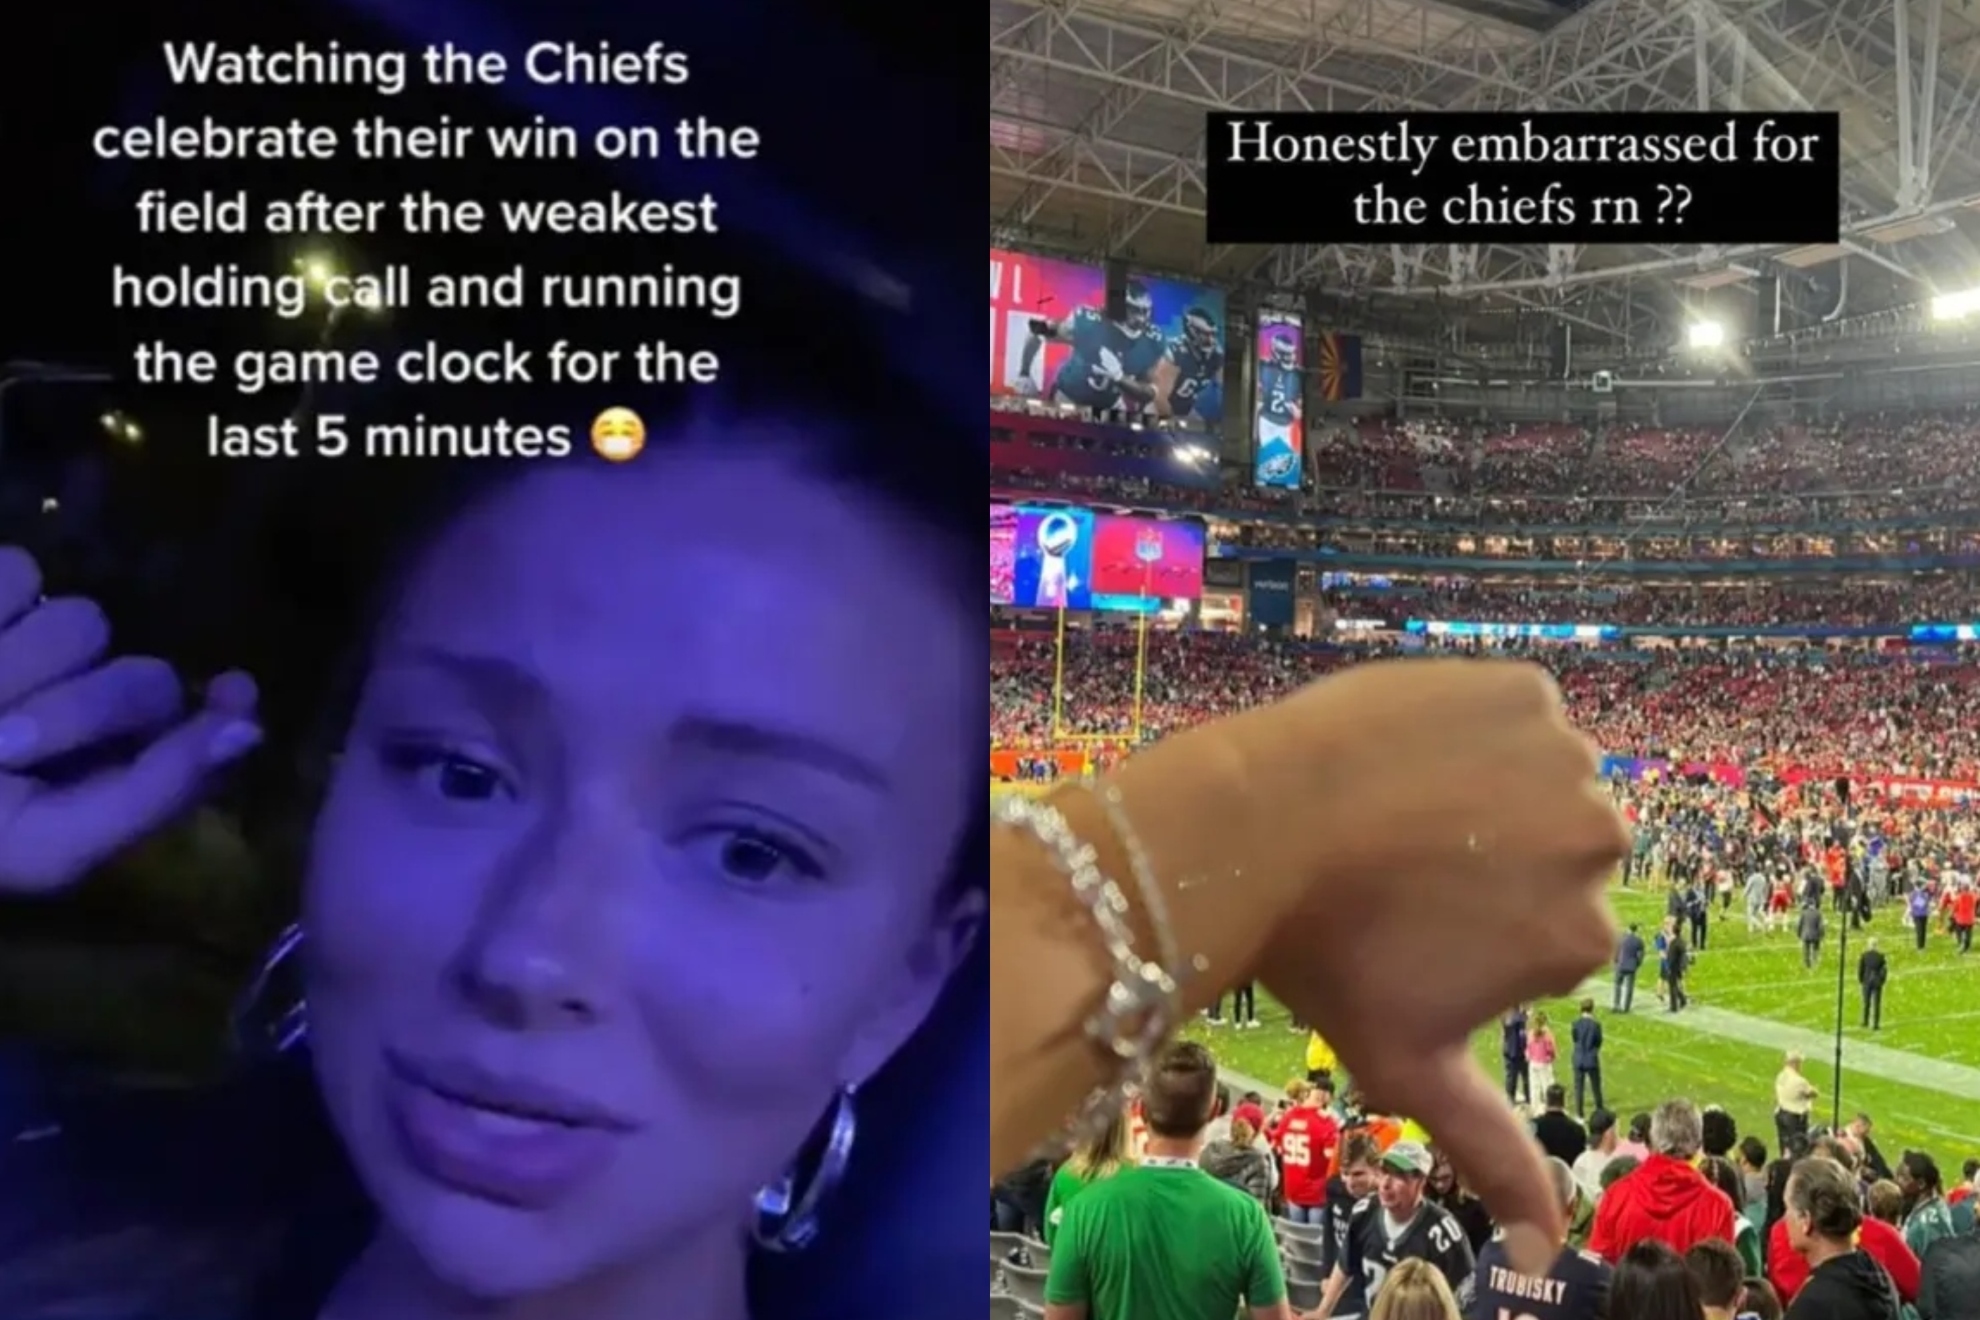 Leah Covey puts Chiefs on blast for celebrating holding